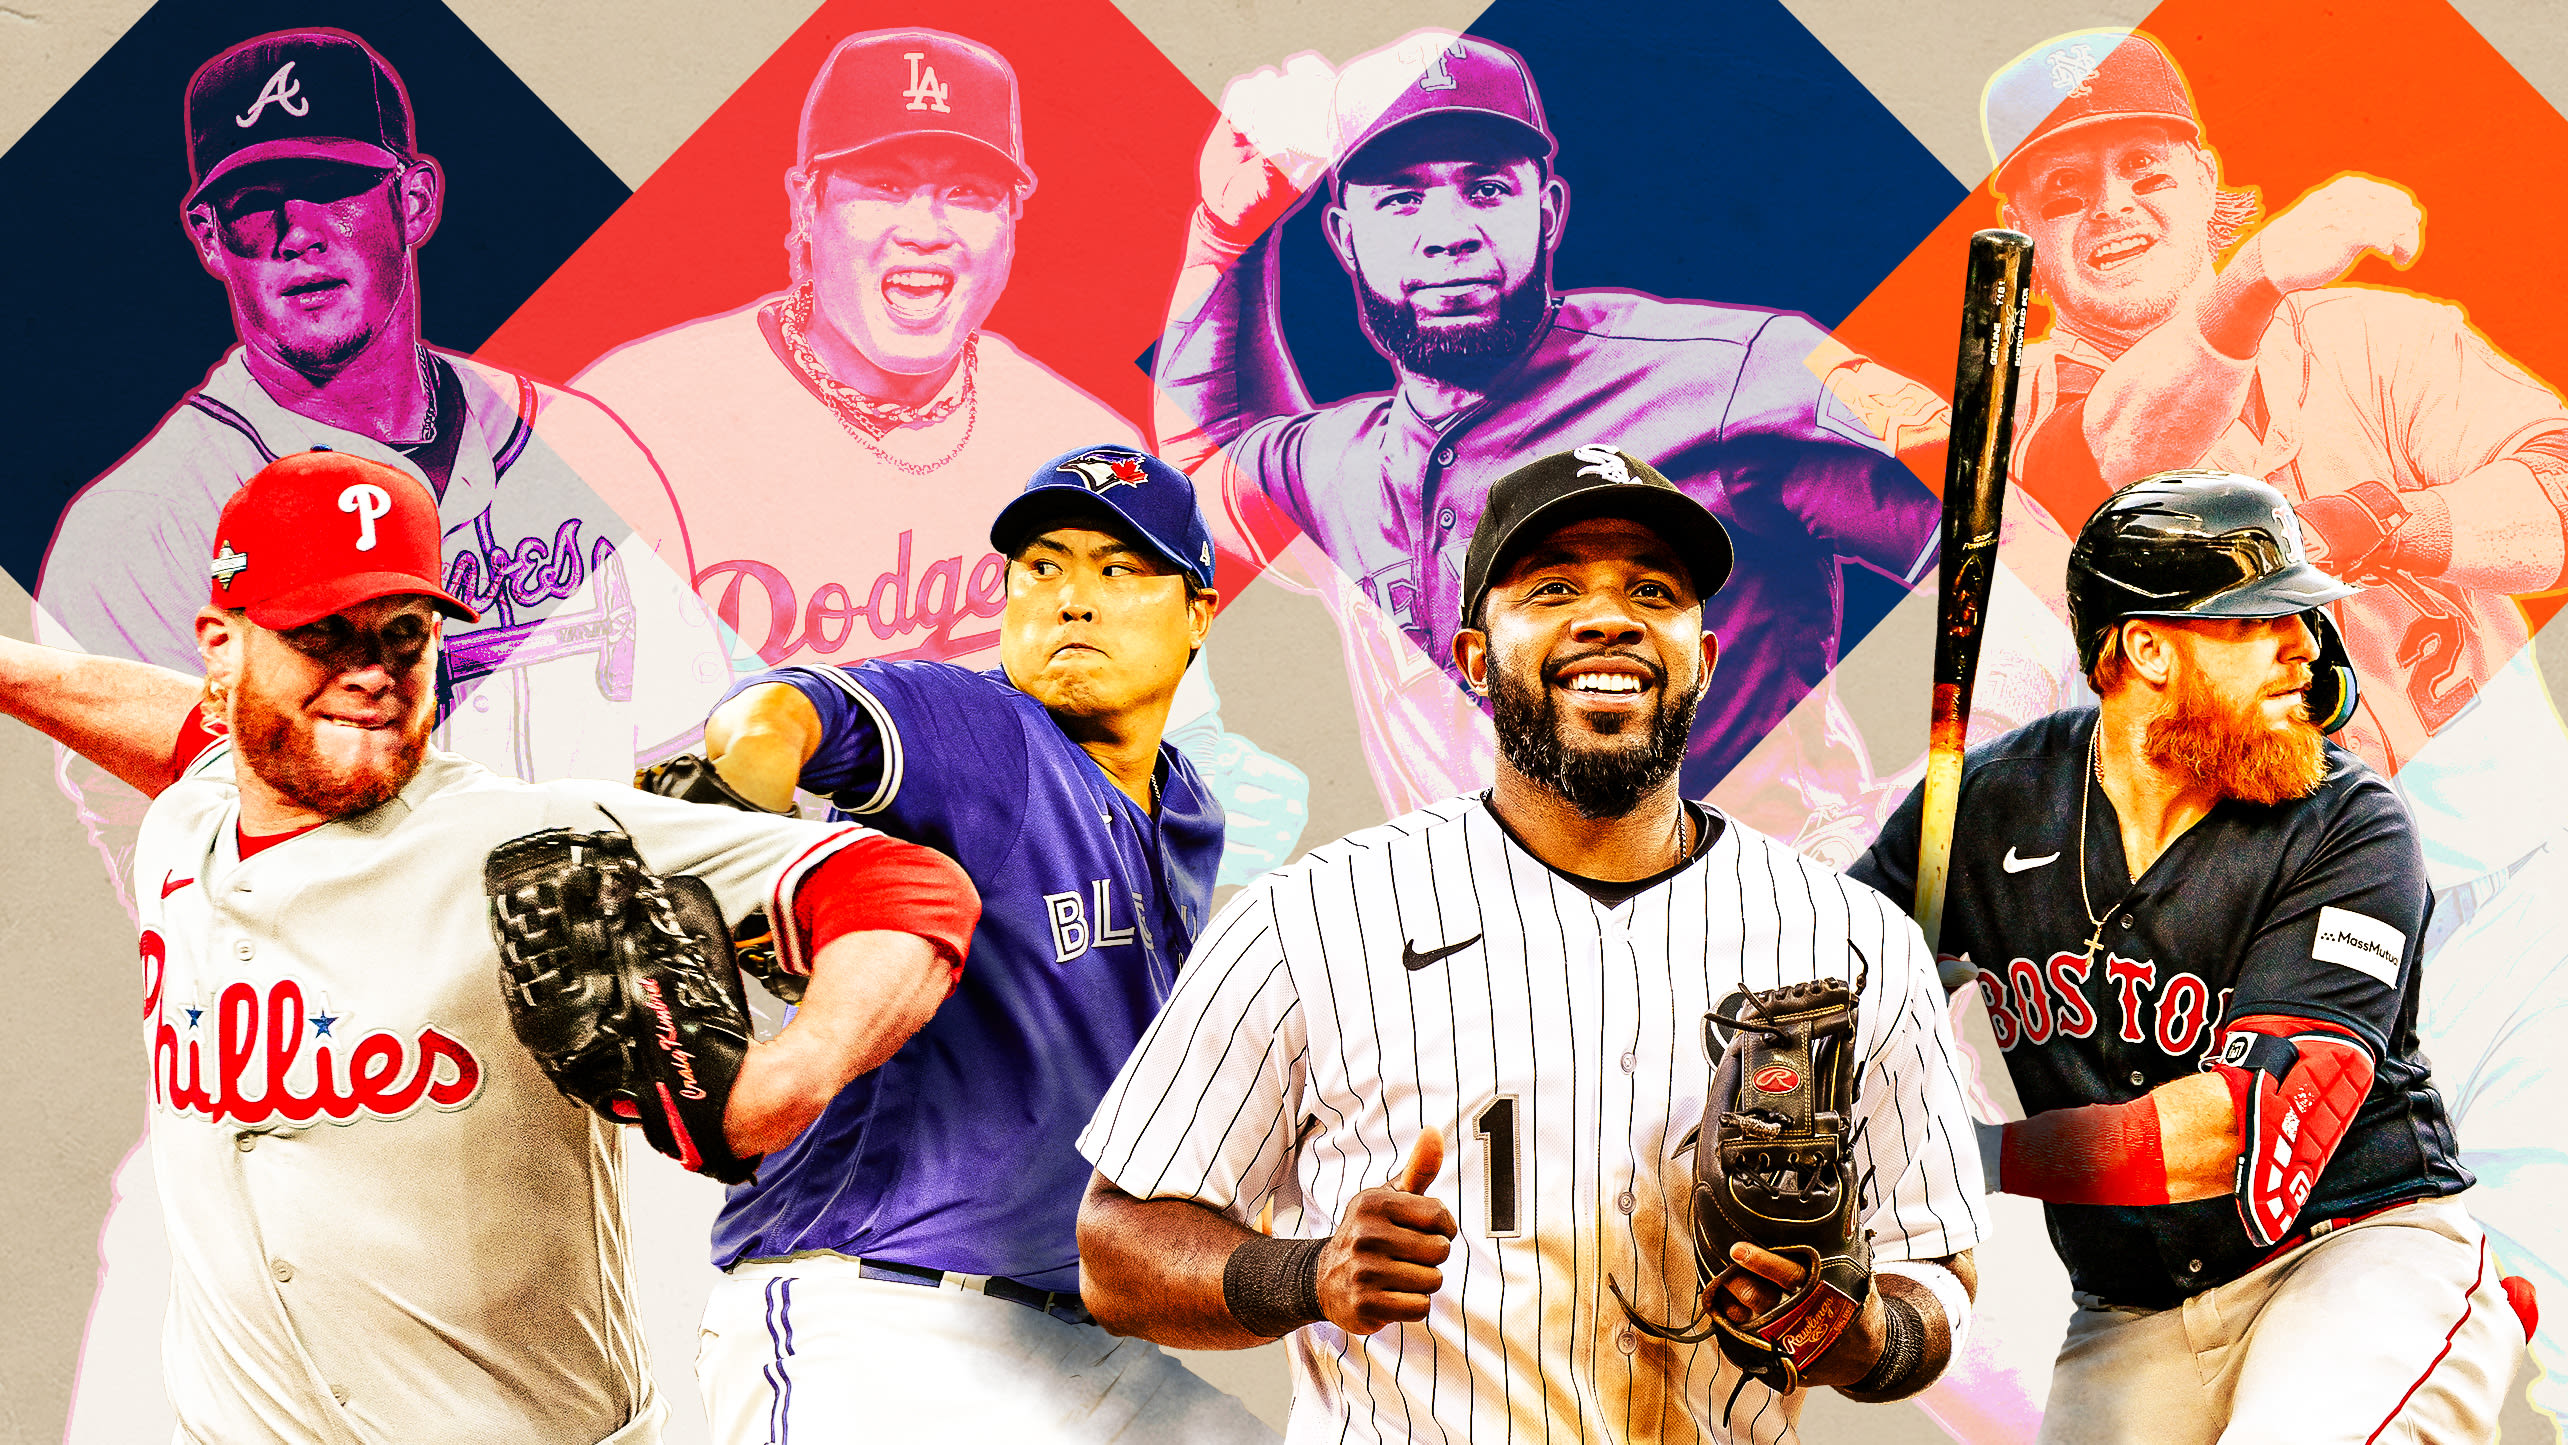 Craig Kimbrel, Hyun Jin Ryu, Elvis Andrus and Justin Turner are each pictured with their most recent team and another former team